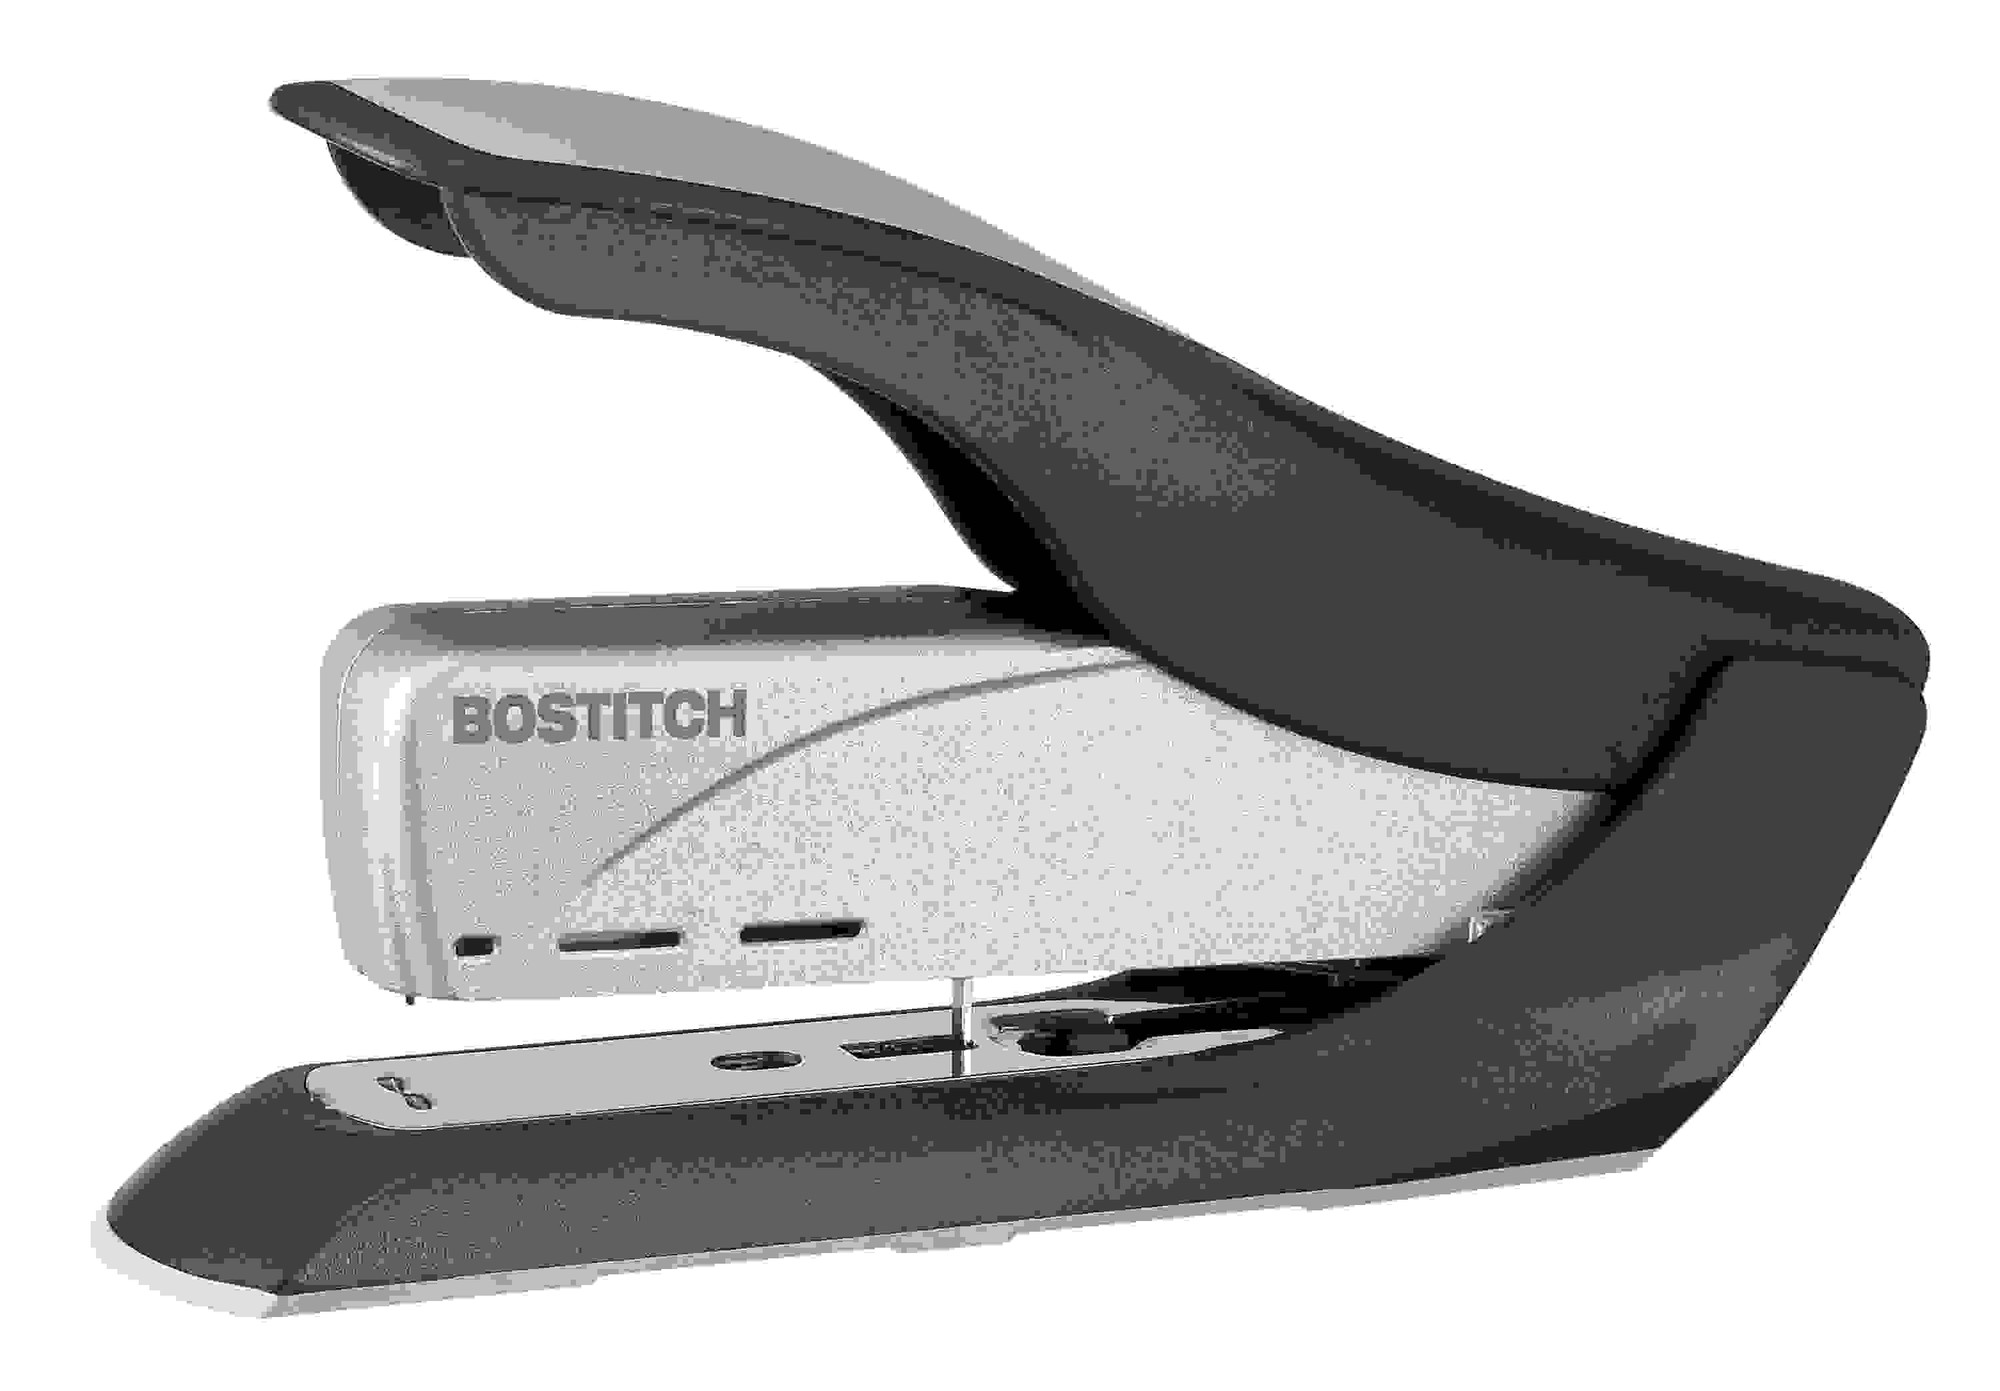 Bostitch Spring-Powered Antimicrobial Heavy Duty Stapler - 65 Sheets Capacity - 500 Staple Capacity - 5/16" , 3/8" Staple Size -